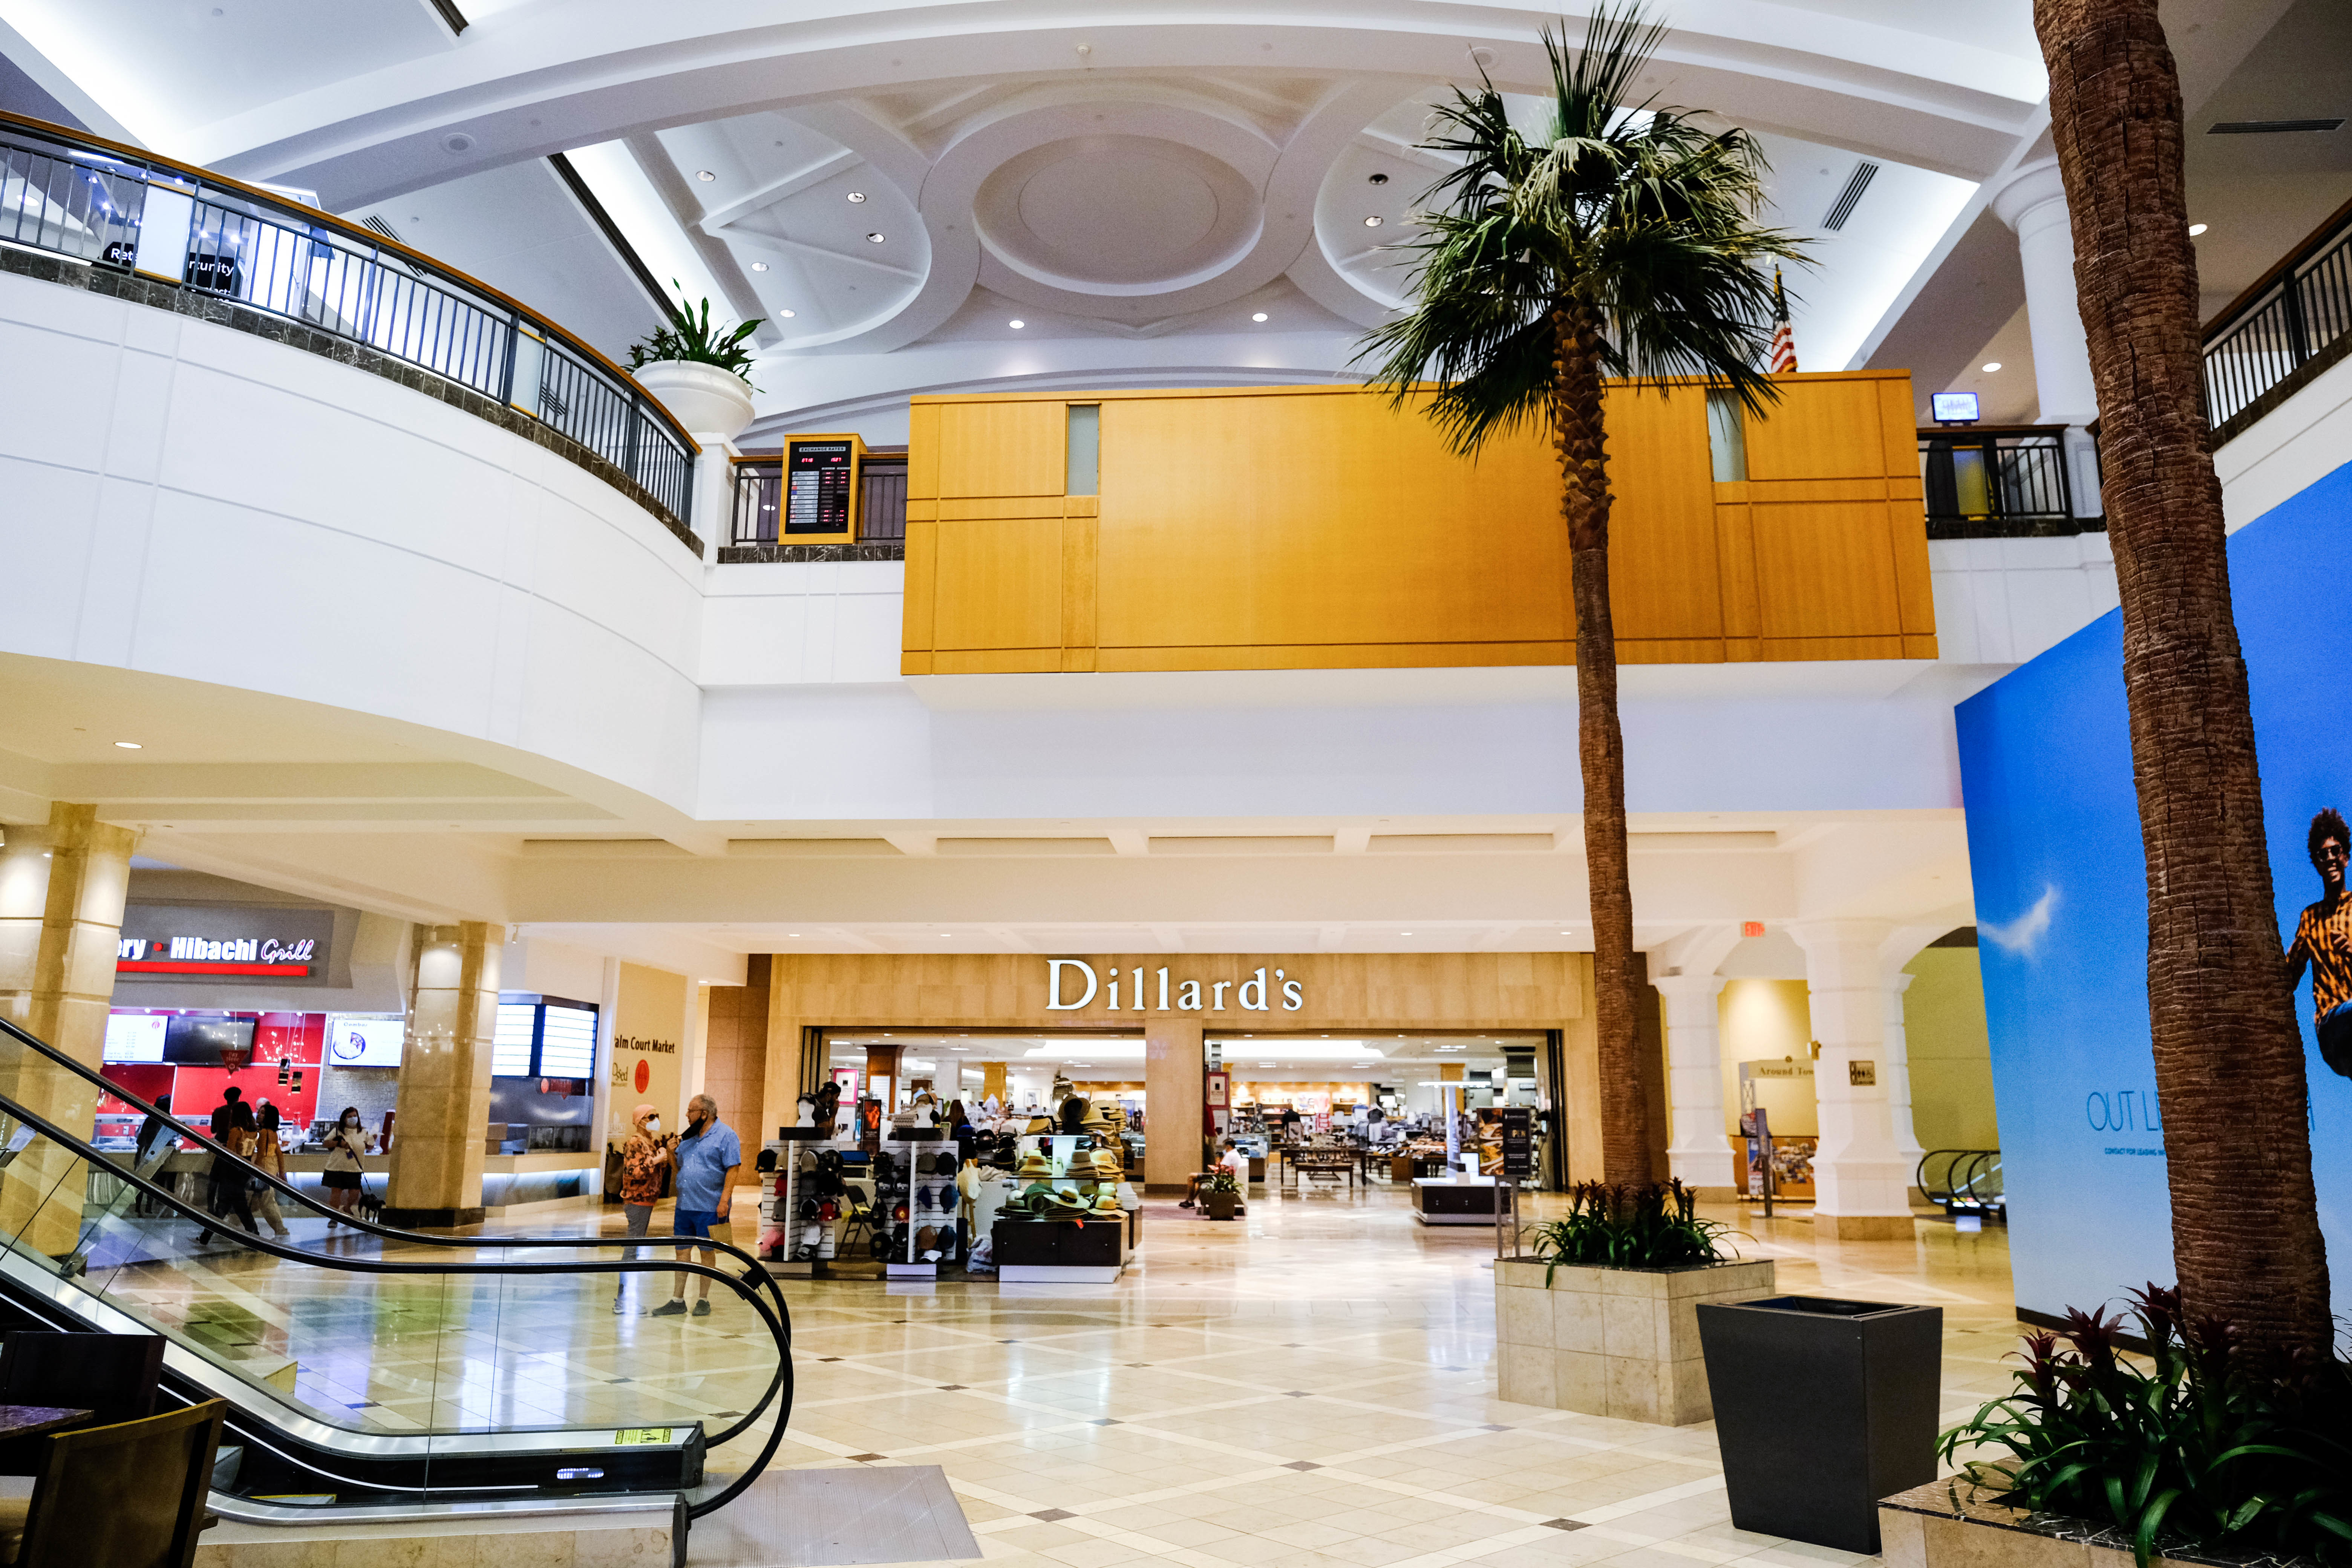 The Galleria Fort Lauderdale shopping plan